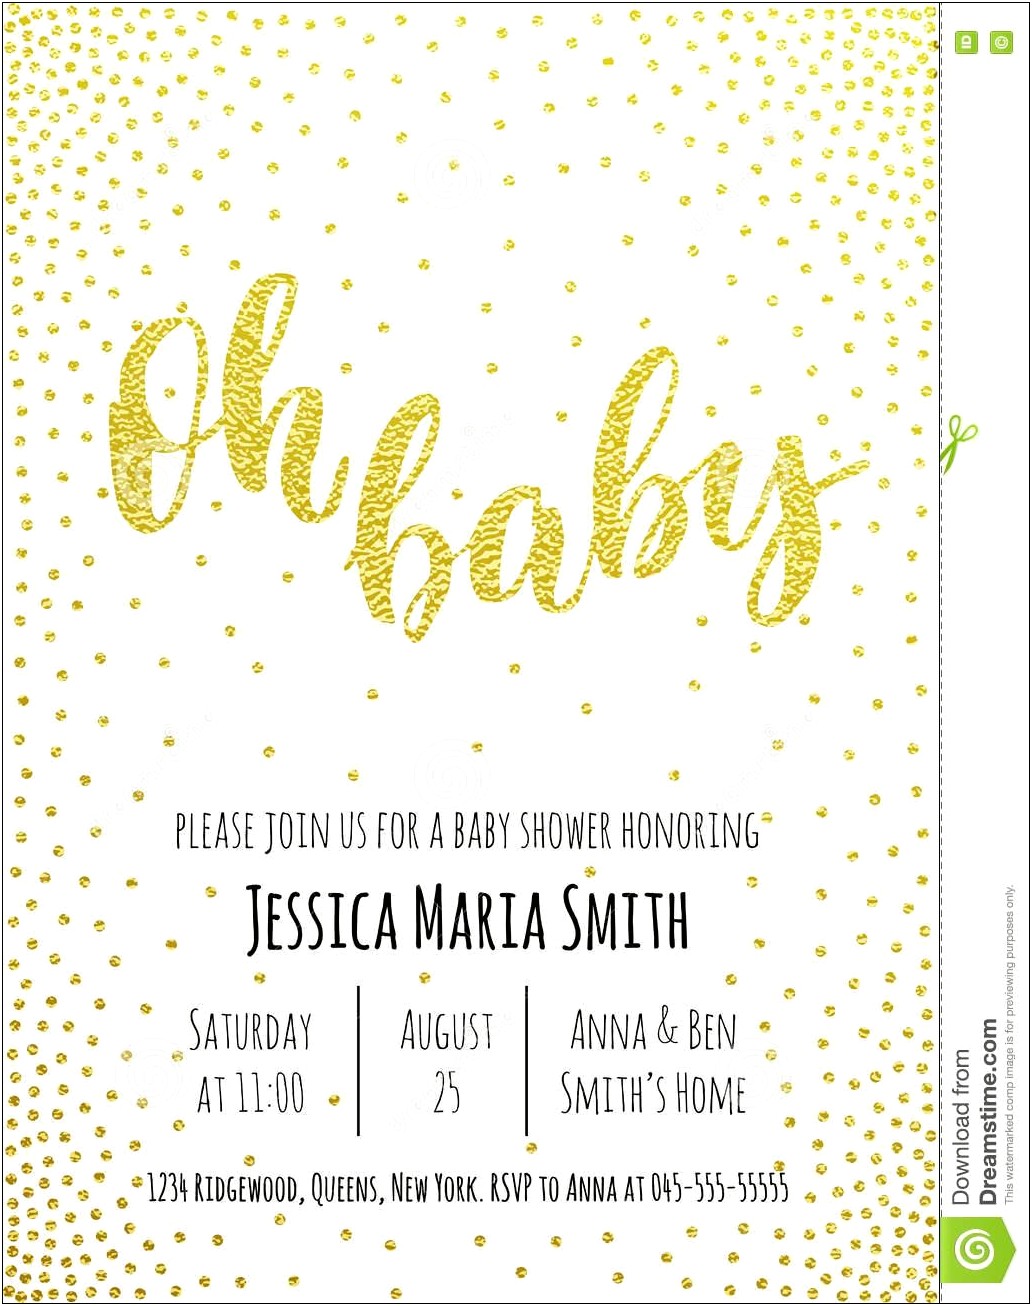 Free Baby Shower Invitation Flyer Template